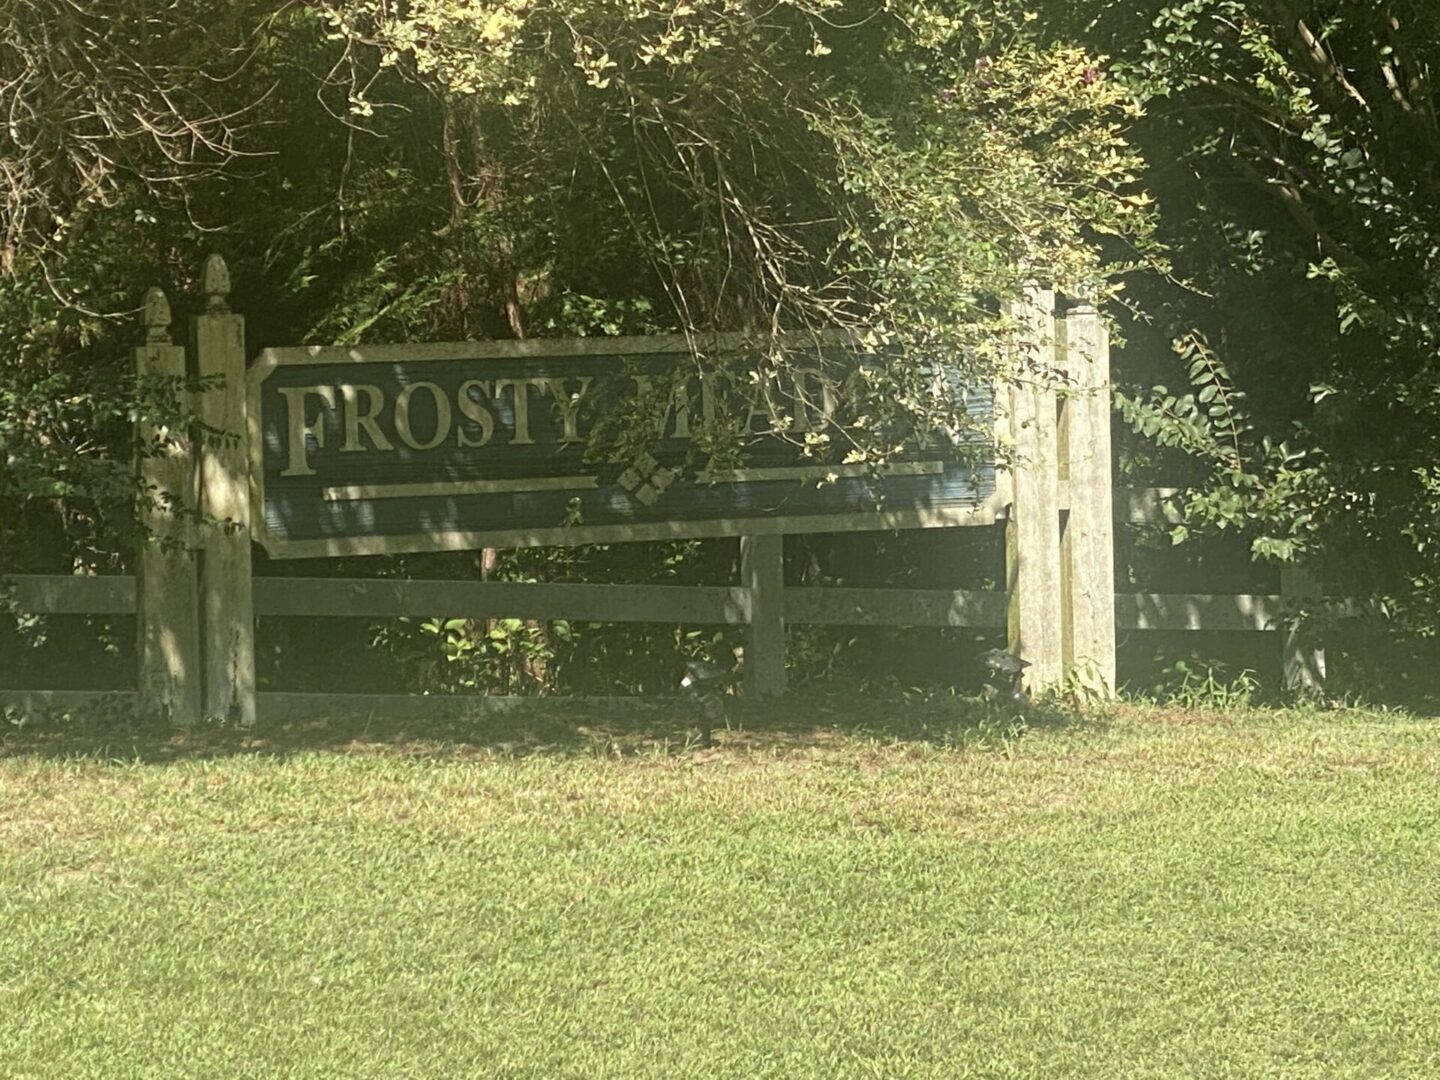 Unique Design Sign on Frosty Meadow